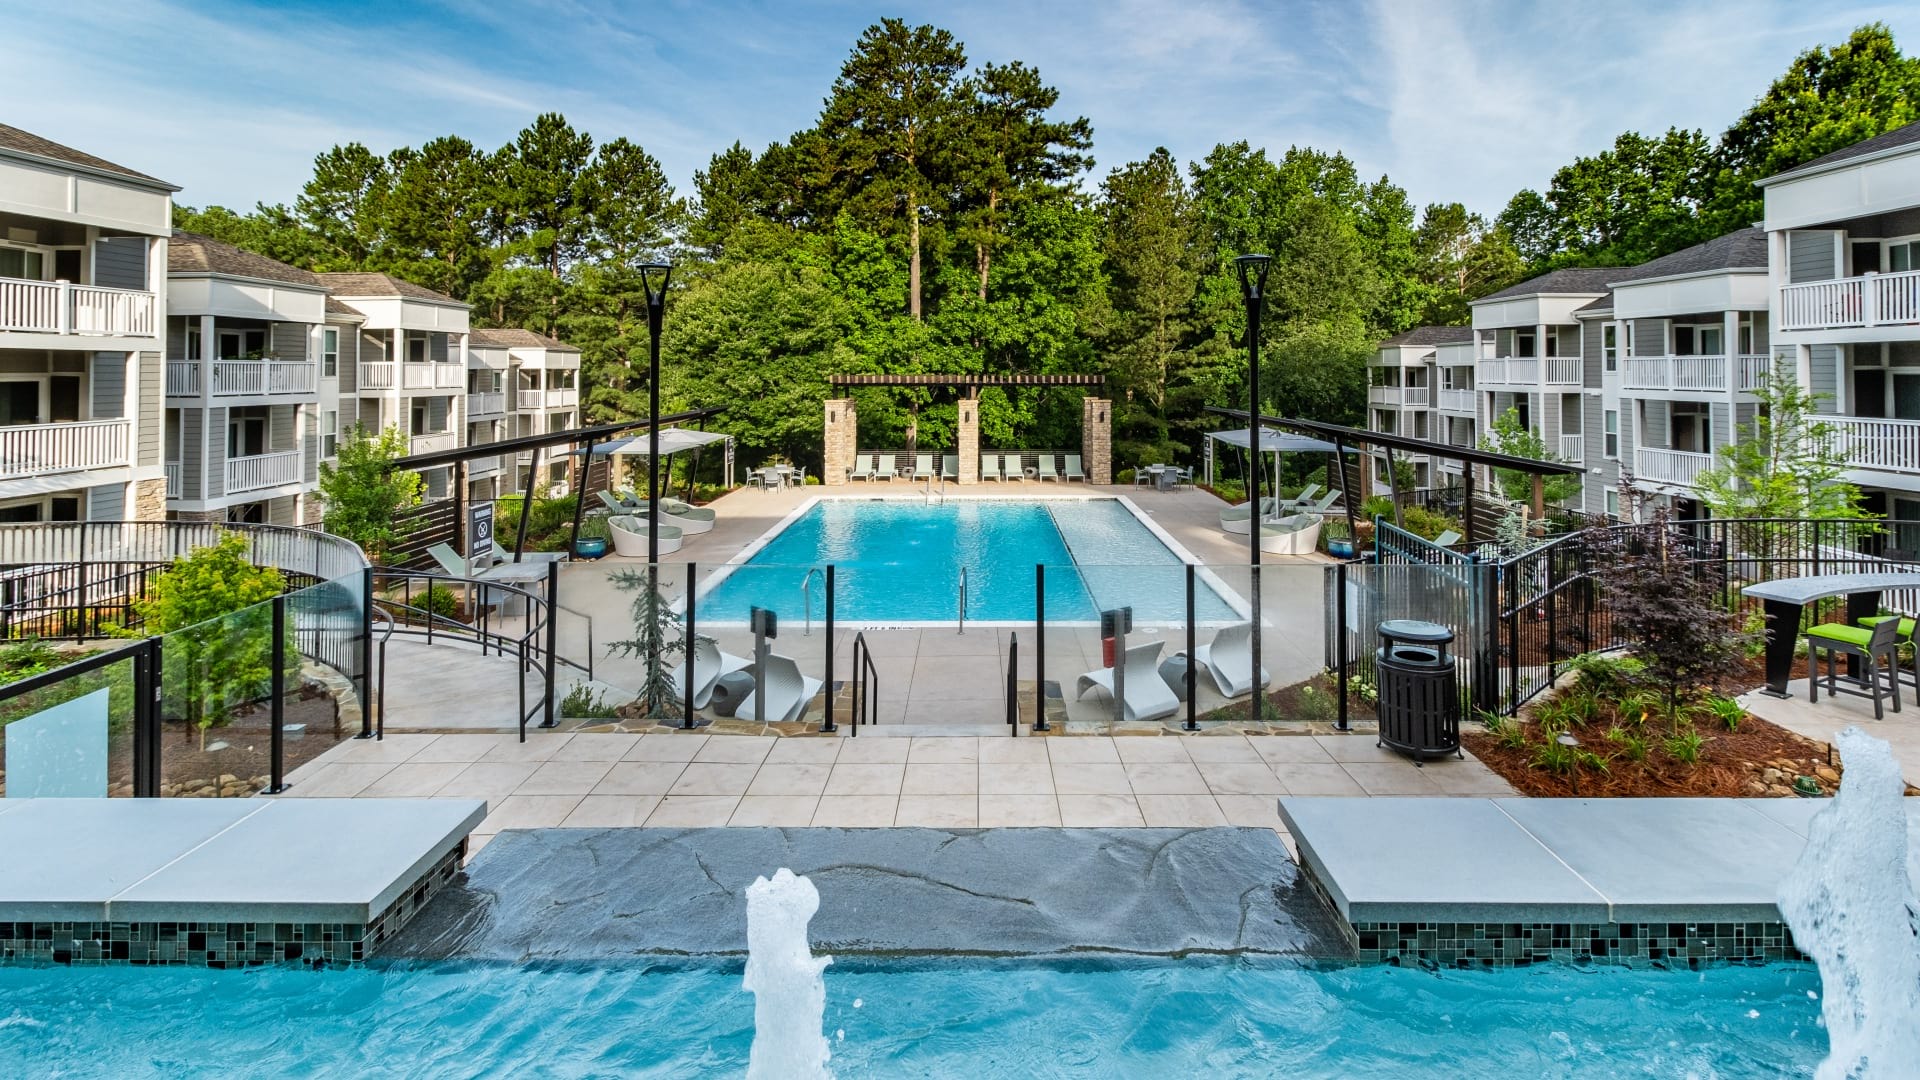 East Cobb apartments with swimming pool